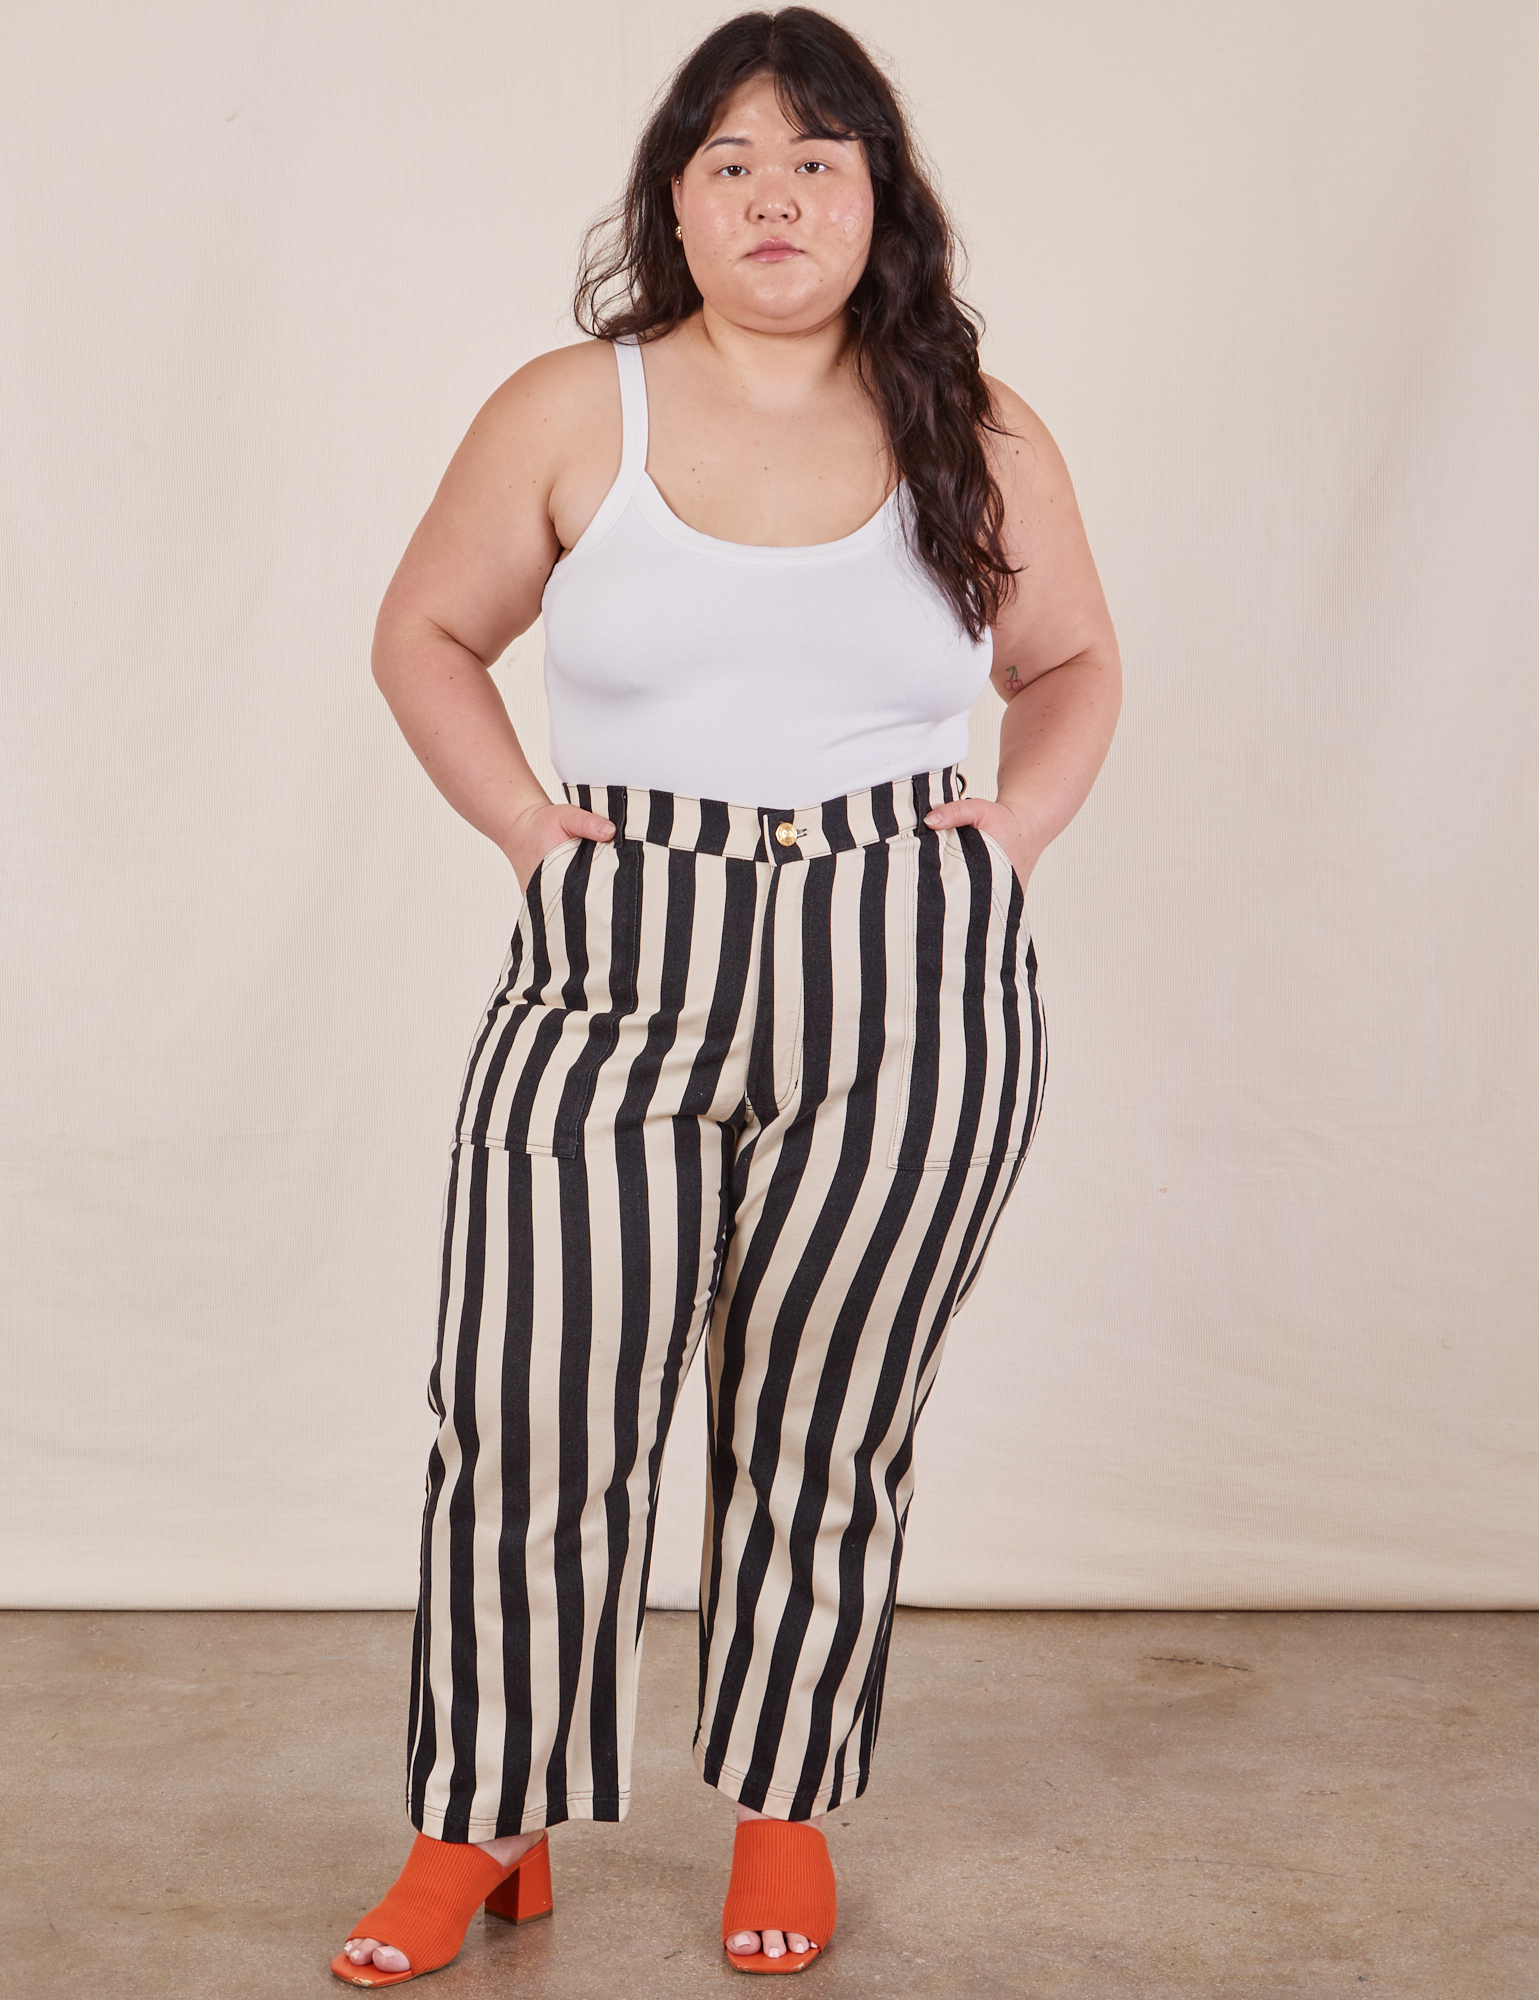 Ashley is 5’7” and wearing 1XL Petite Black Striped Work Pants in White paired with vintage off-white Cropped Cami